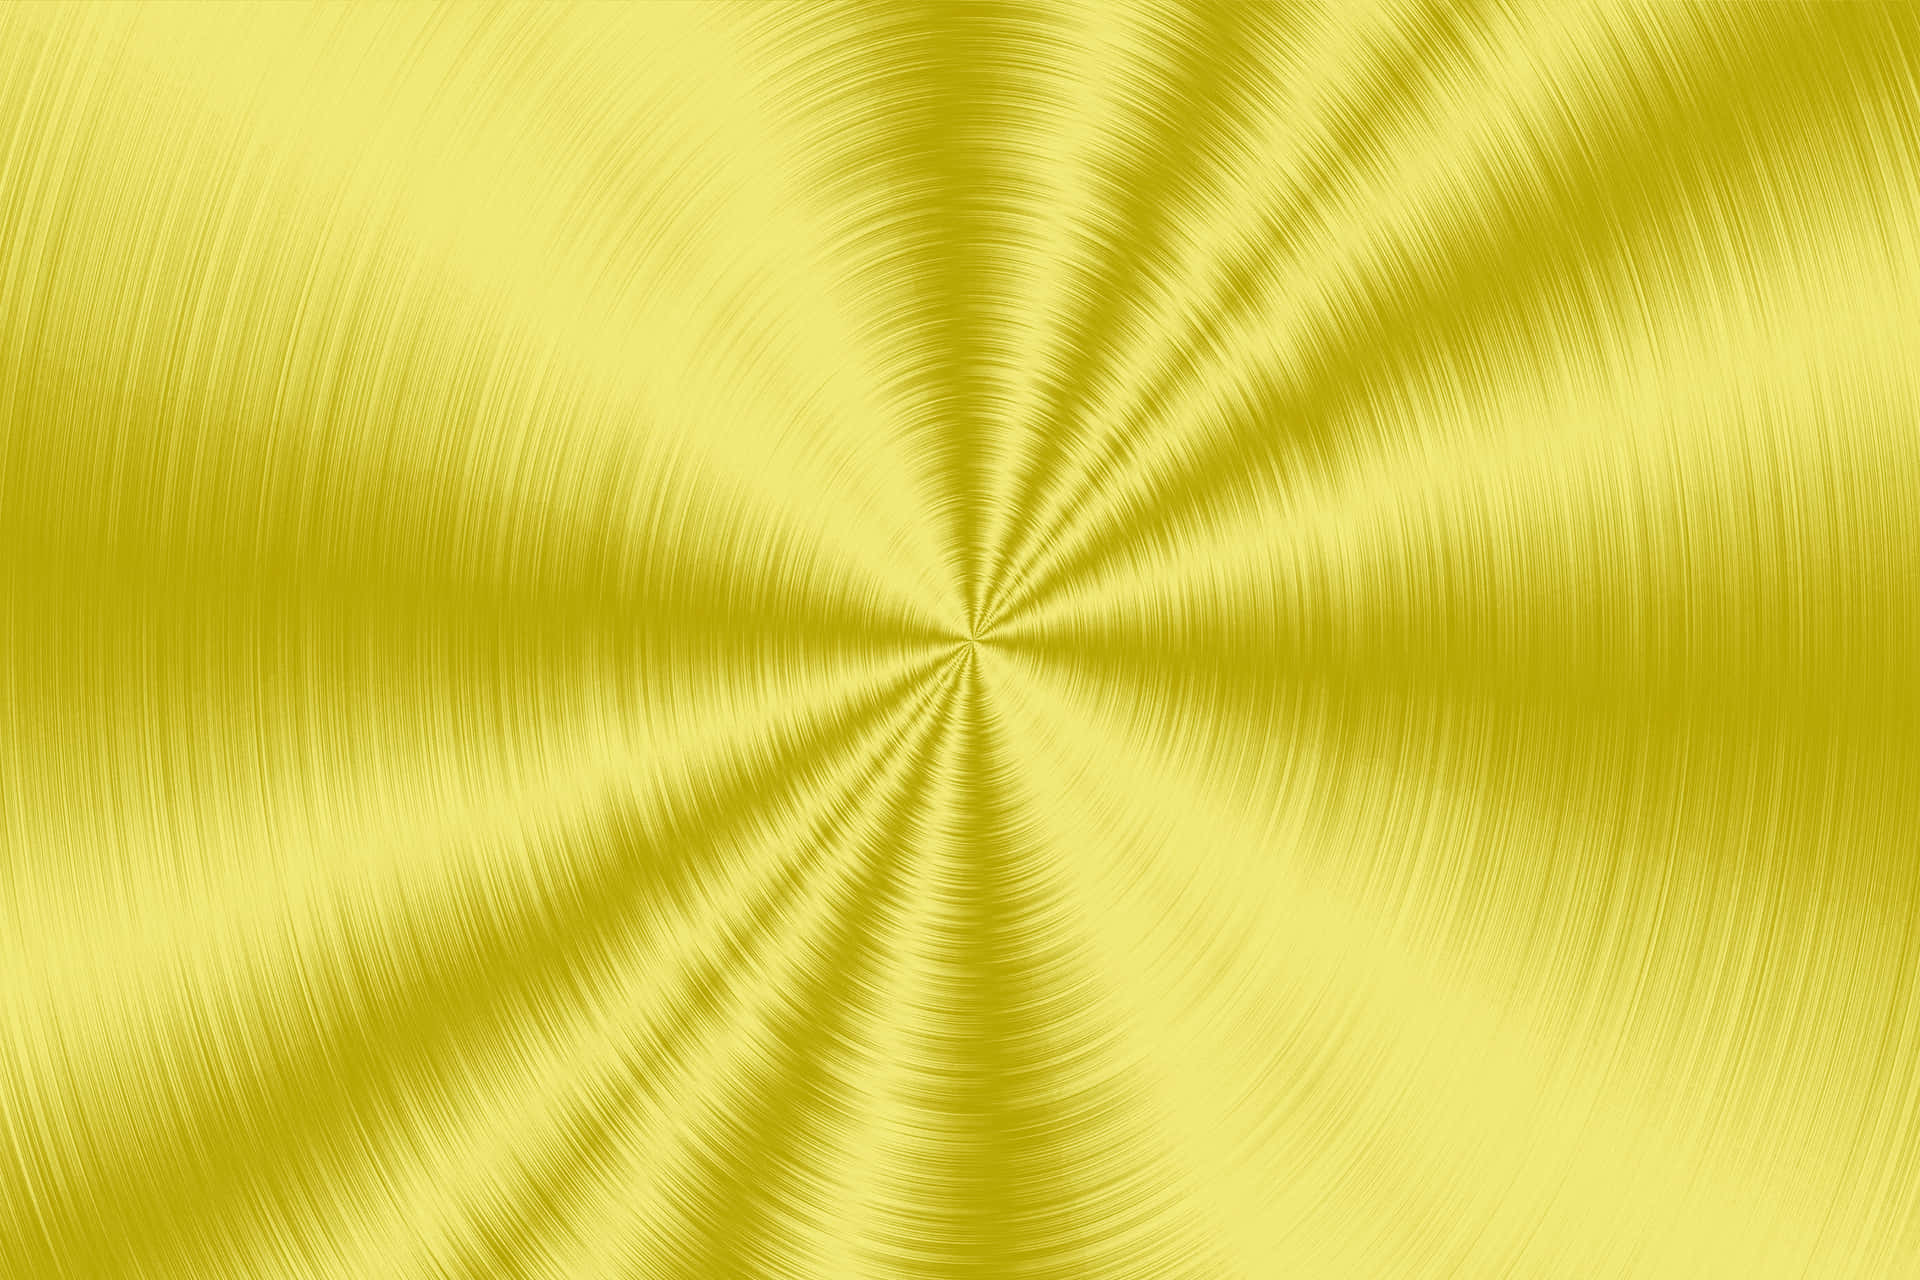 Gold Texture Pictures 3000 X 2000 Picture